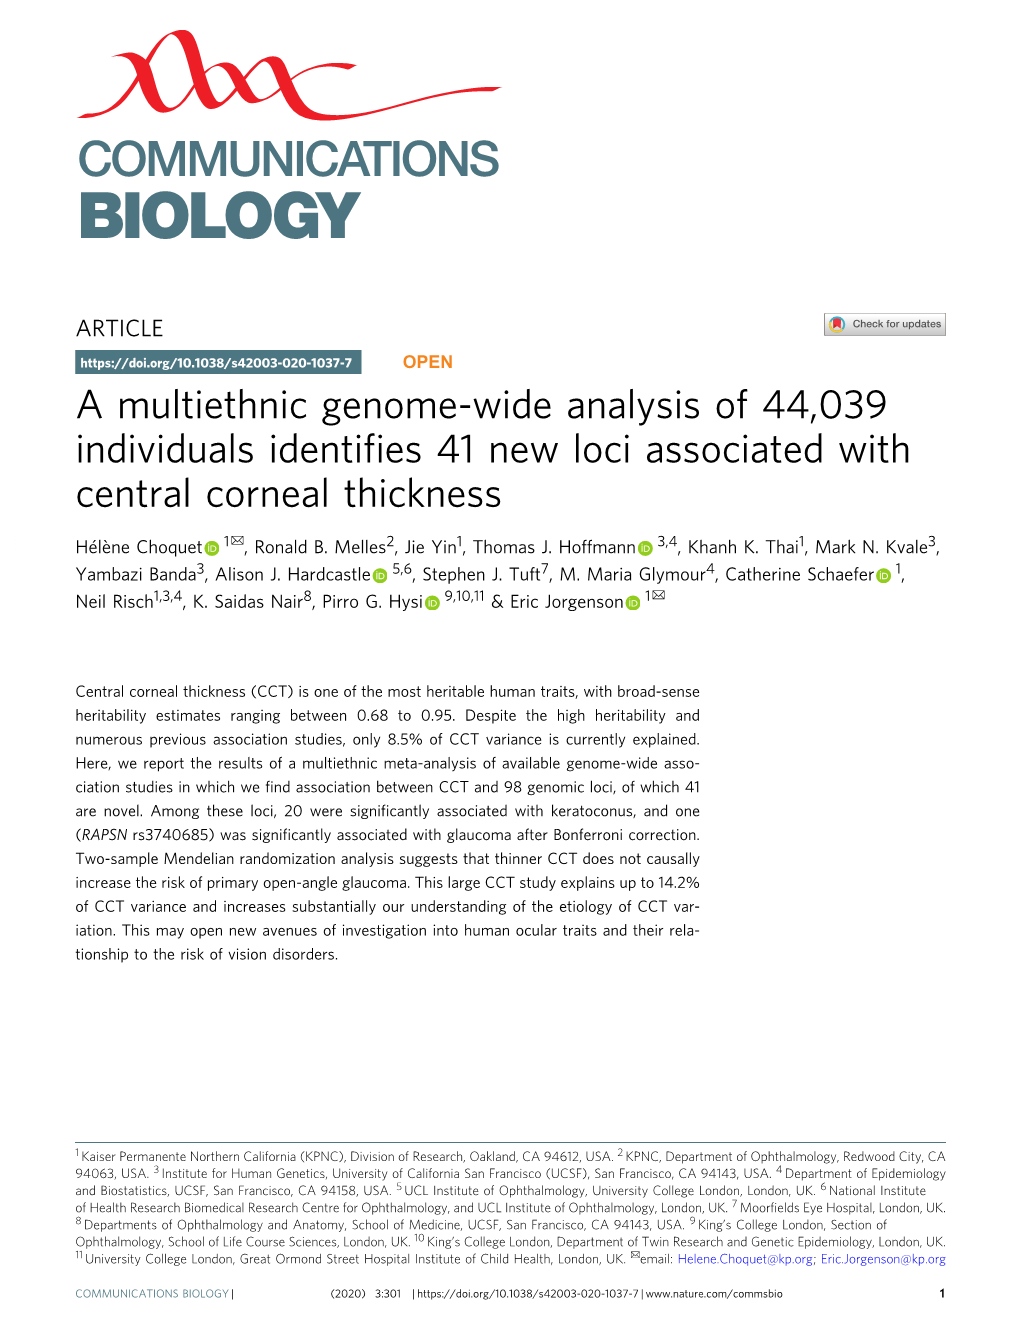 A Multiethnic Genome-Wide Analysis of 44,039 Individuals Identifies 41 New Loci Associated with Central Corneal Thickness